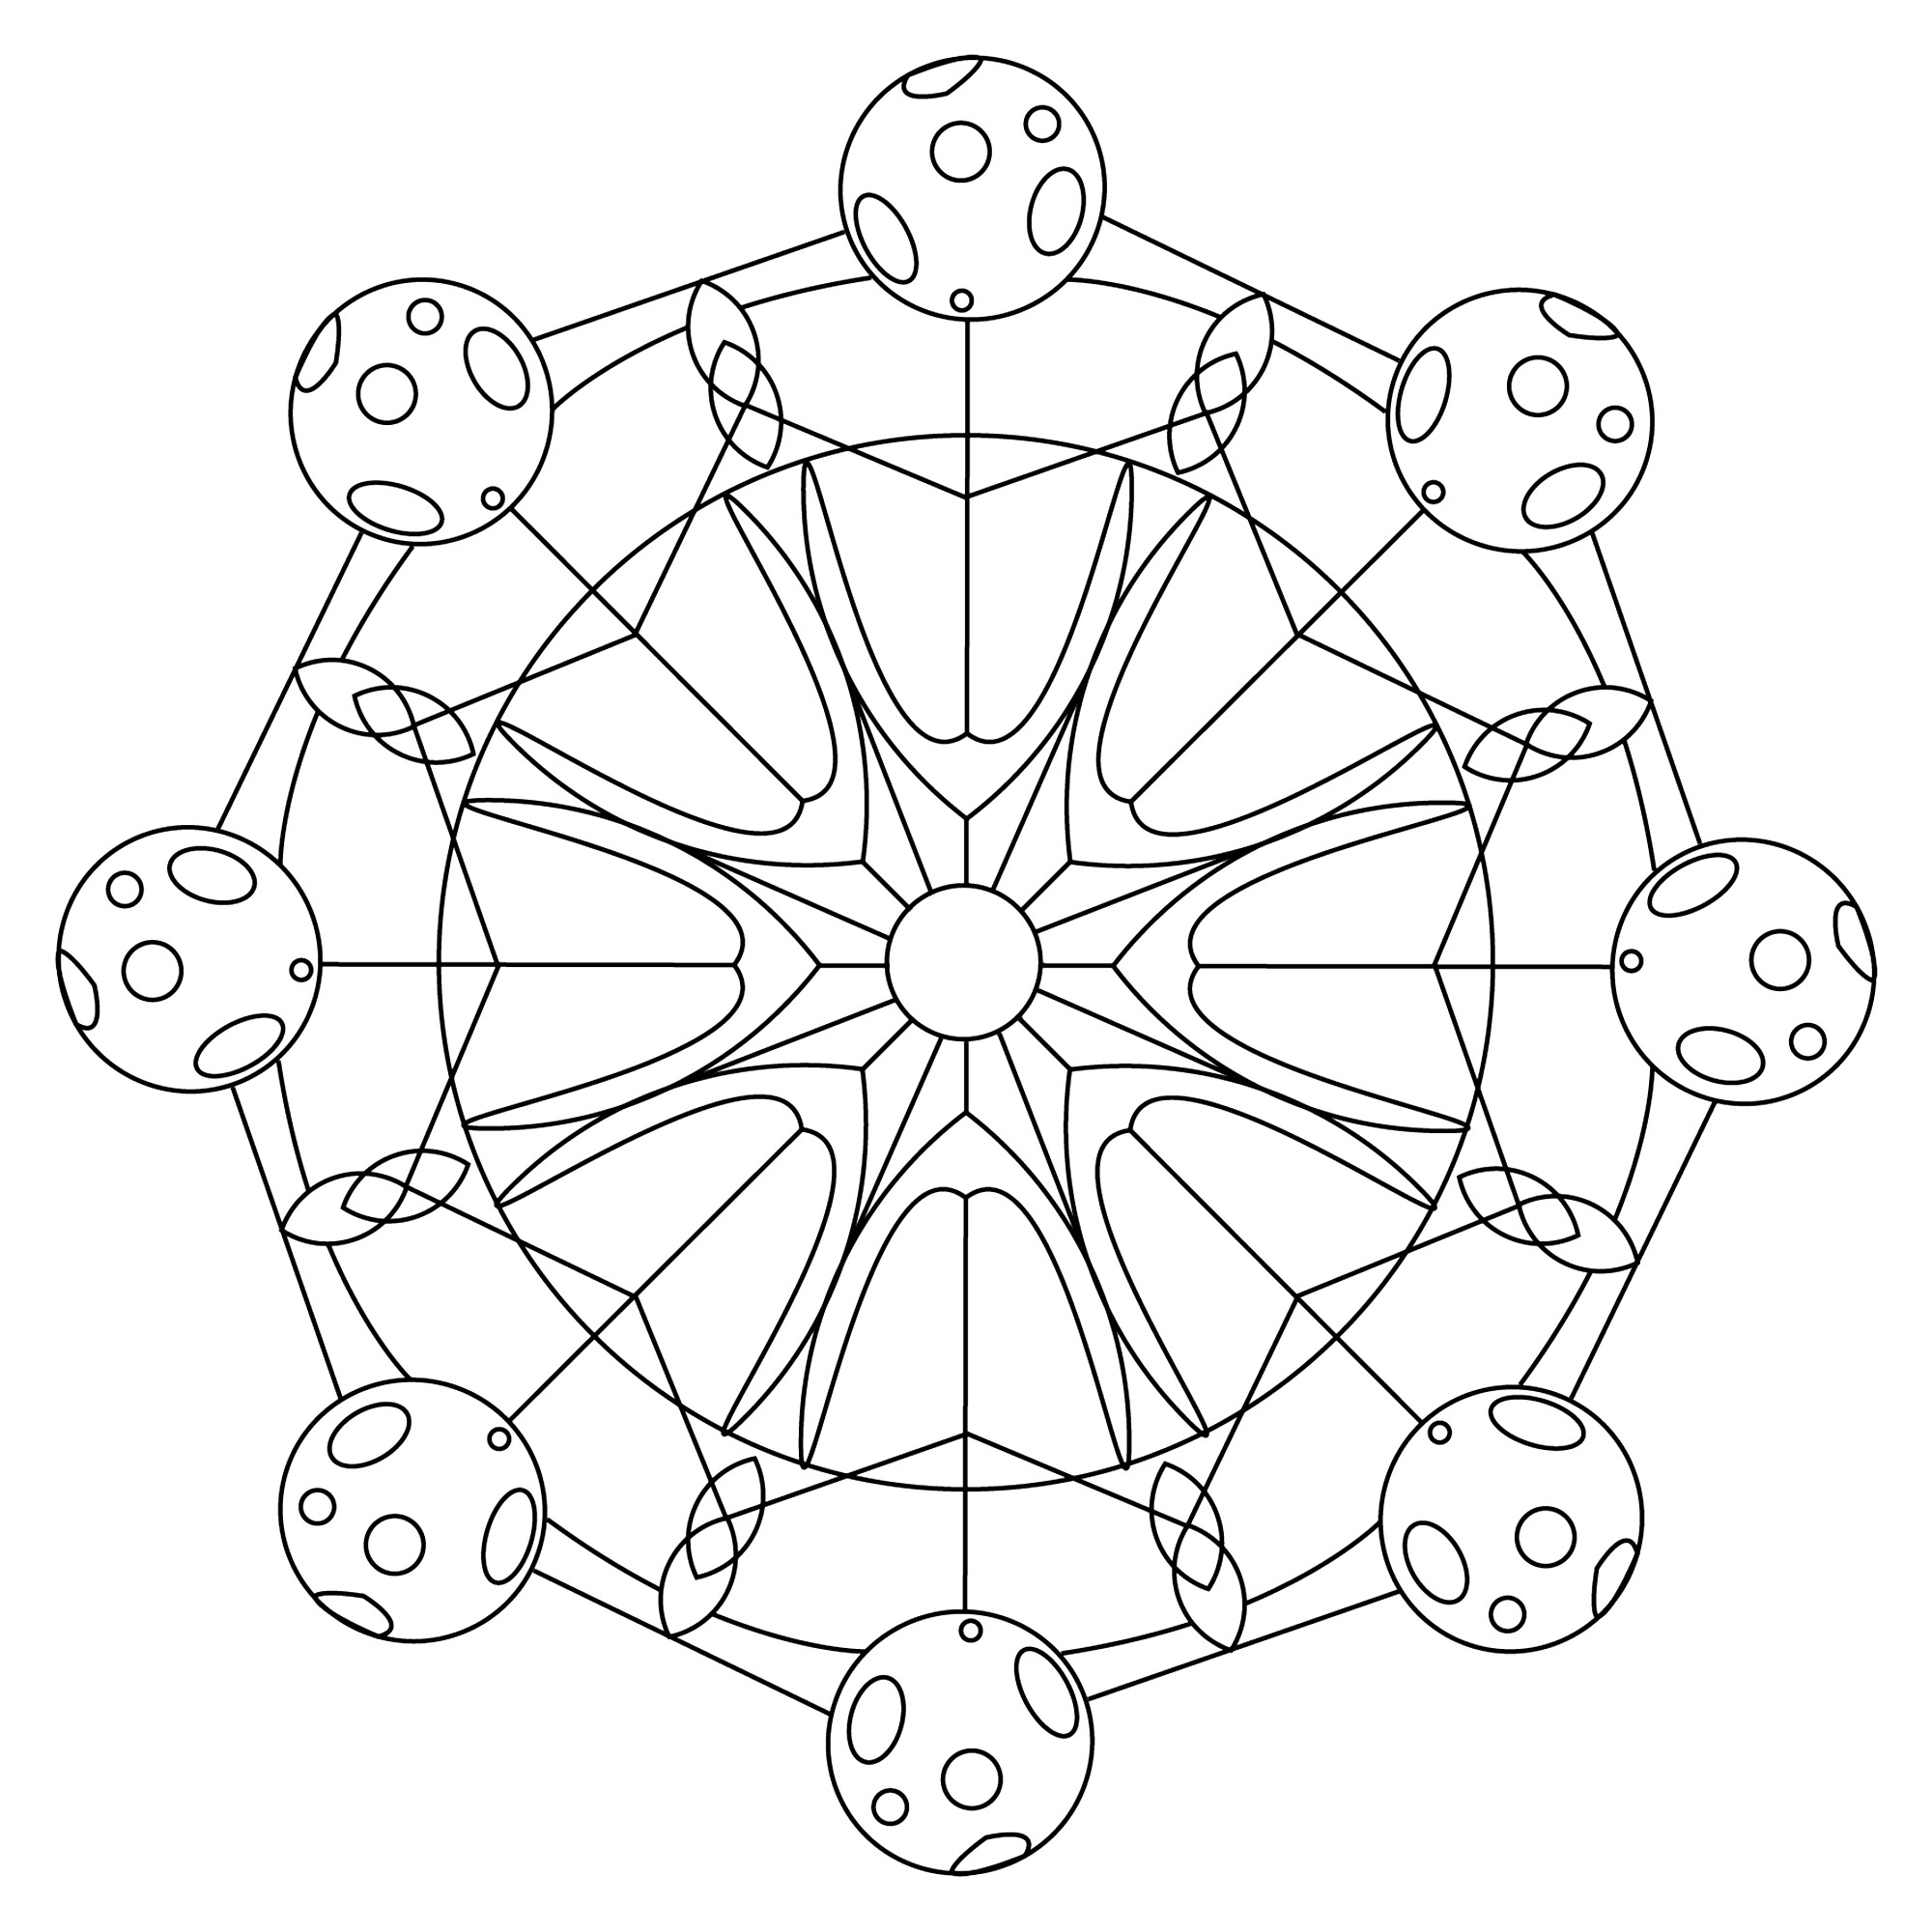 Color this mandala with symbols of the Sun and the Moon